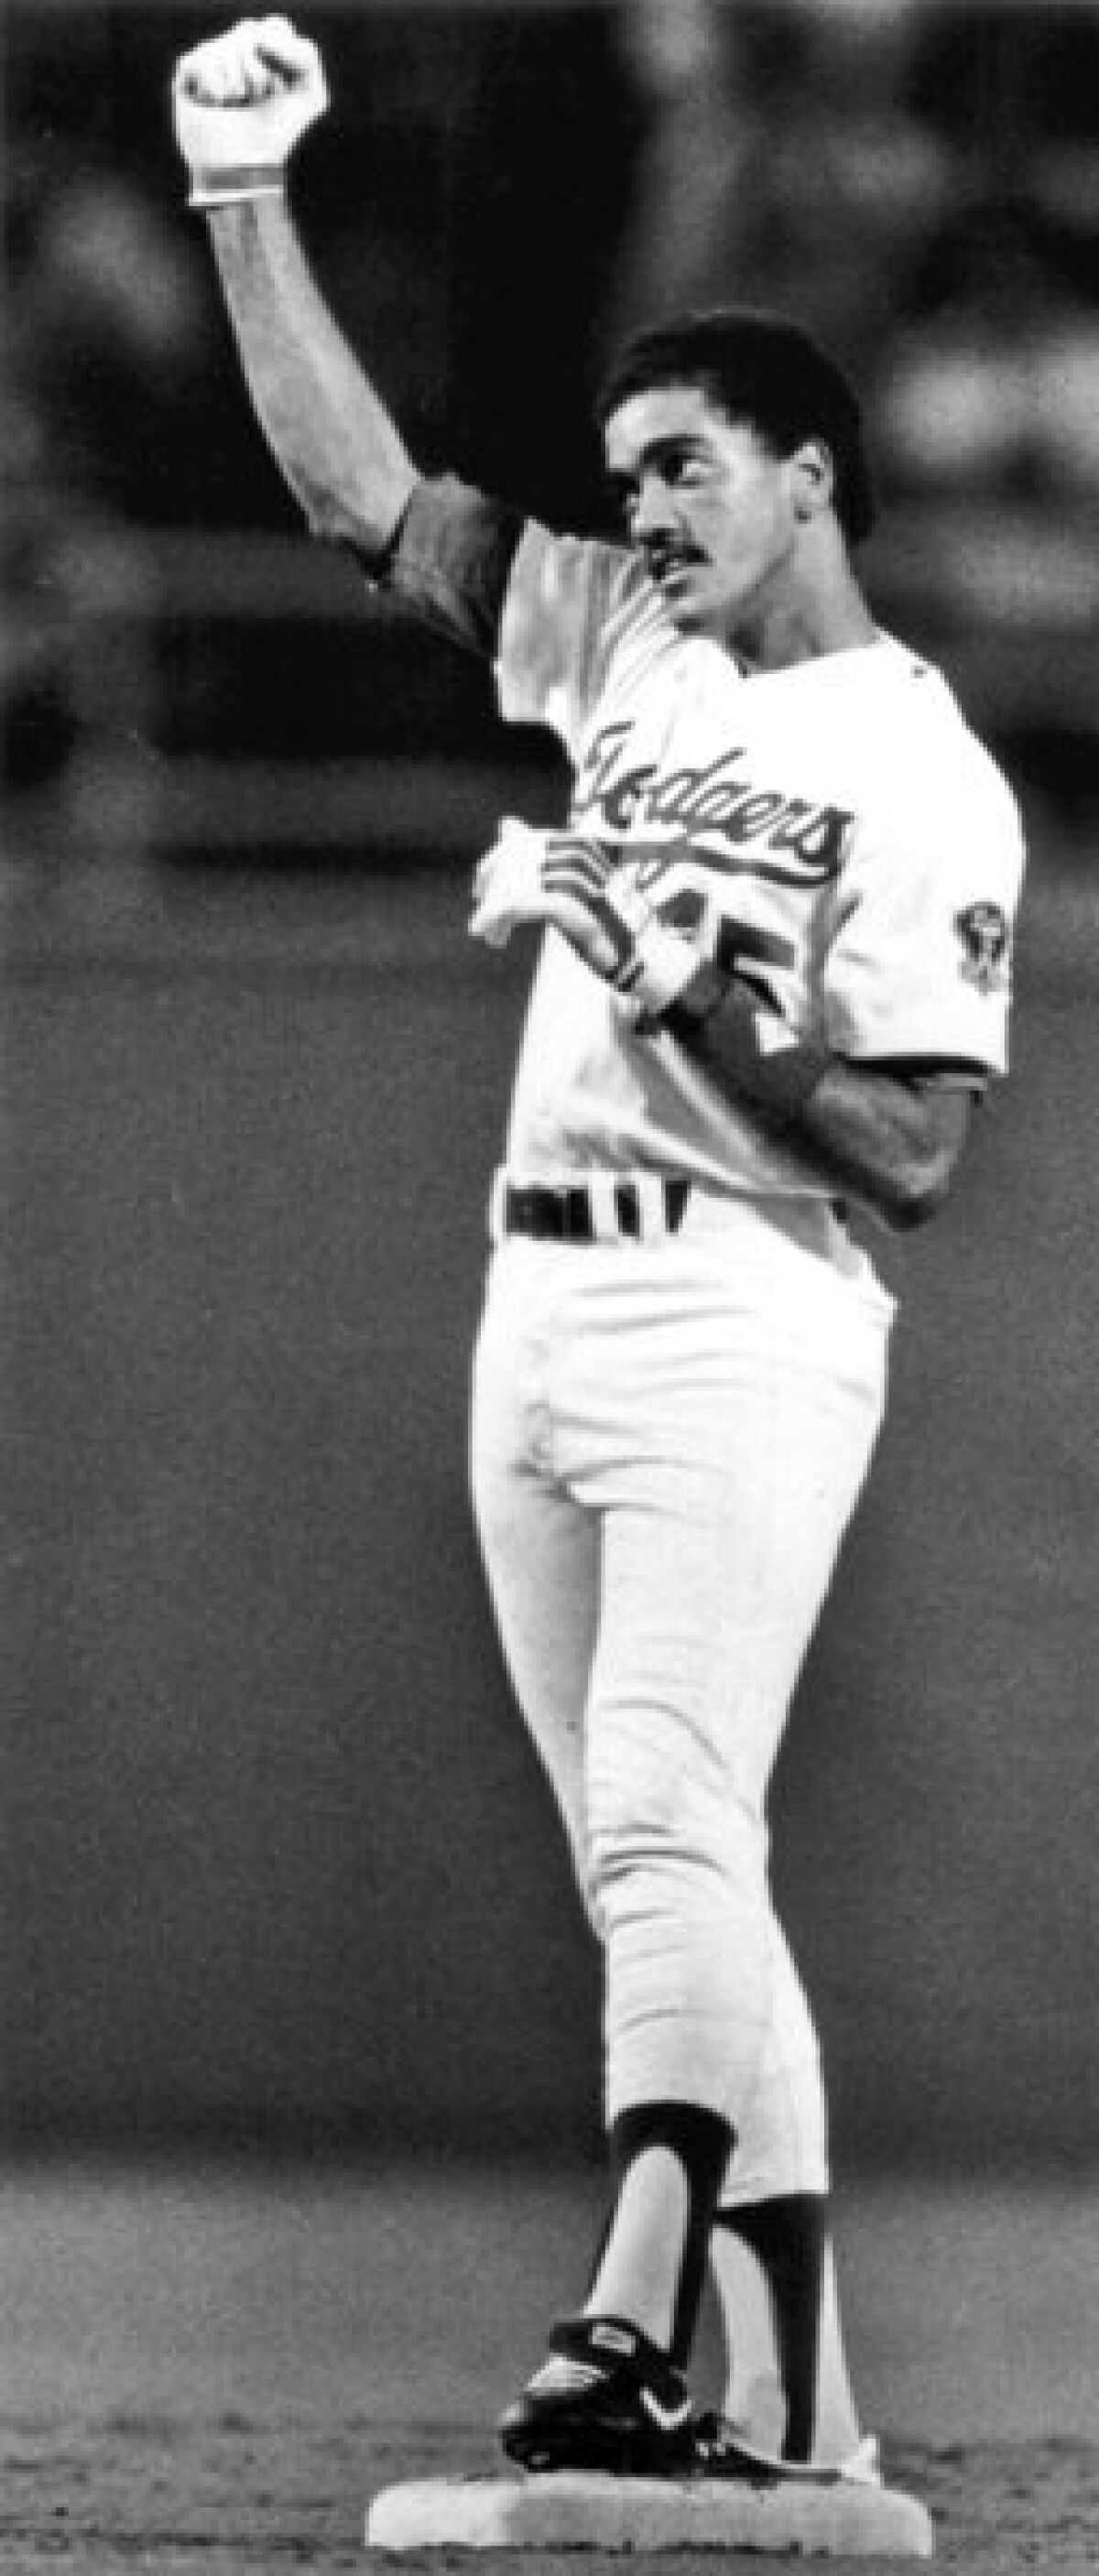 June 24, 1983: Dodgers 19-year old rookie Gilberto Reyes, from the Dominican Republic, celebrates his first major league hit - a double - during his first home start at Dodger Stadium.